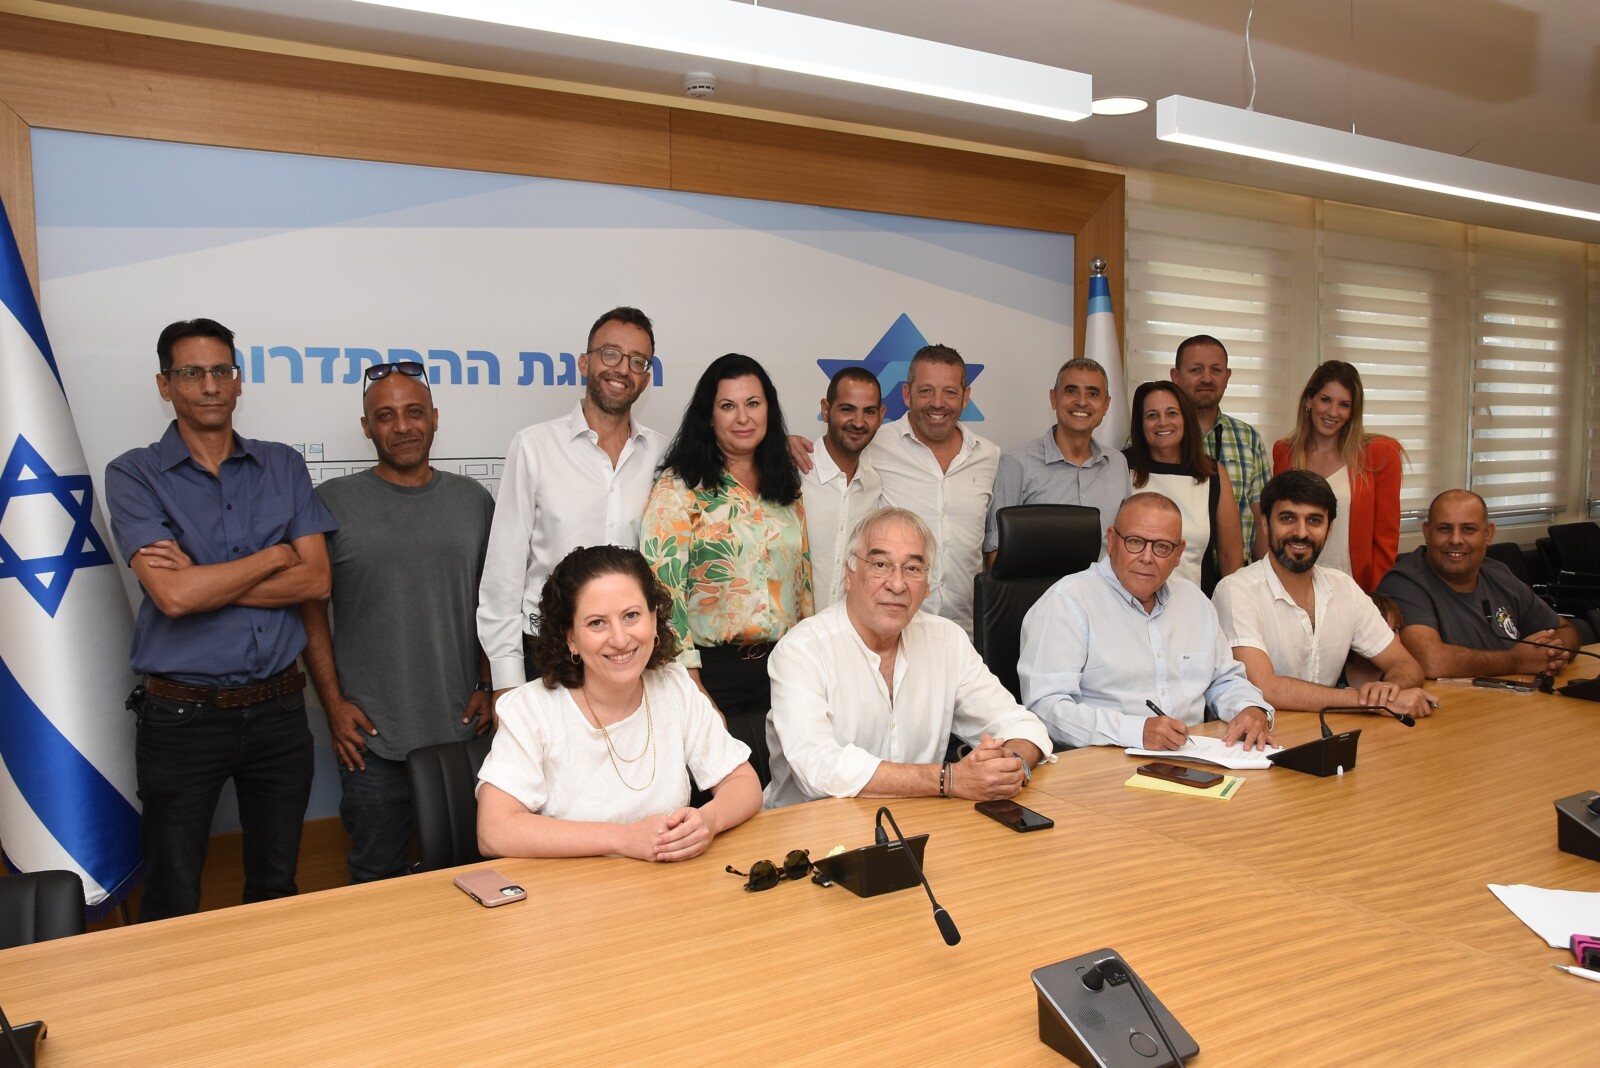 Signing of the first collective bargaining agreement at Tevel Metro, which operates the Gush Dan light rail line (Photo: Histadrut Spokesperson's Office).